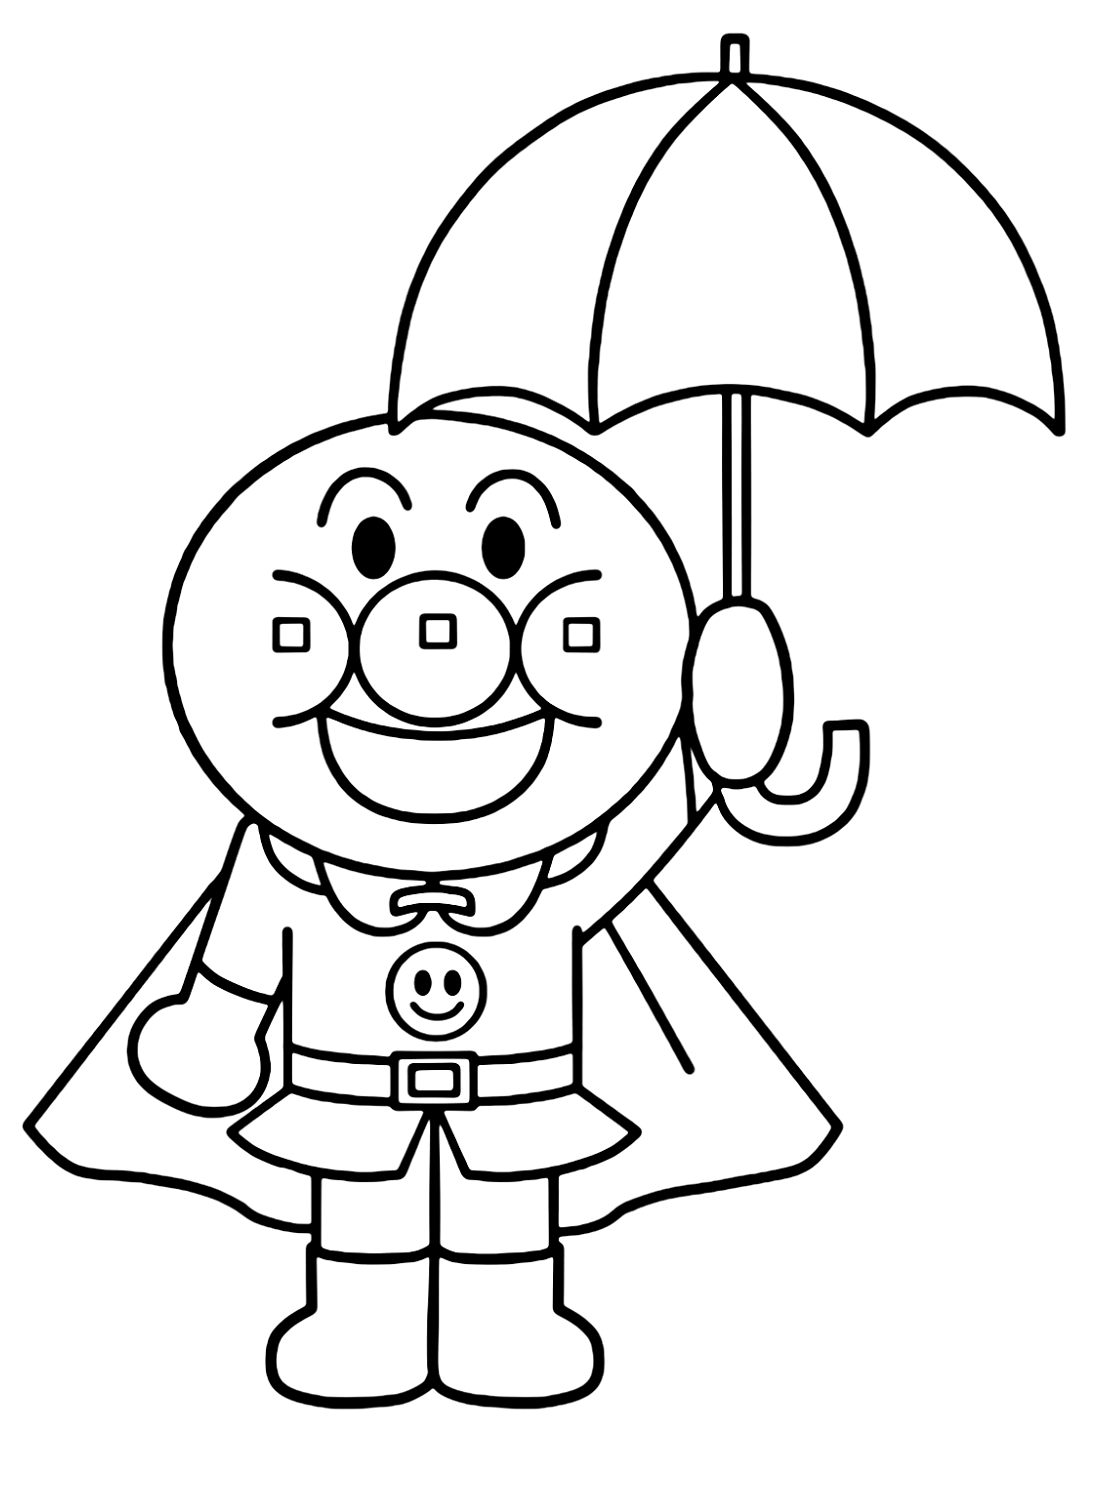 Anpanman holding Umbrella Coloring Pages